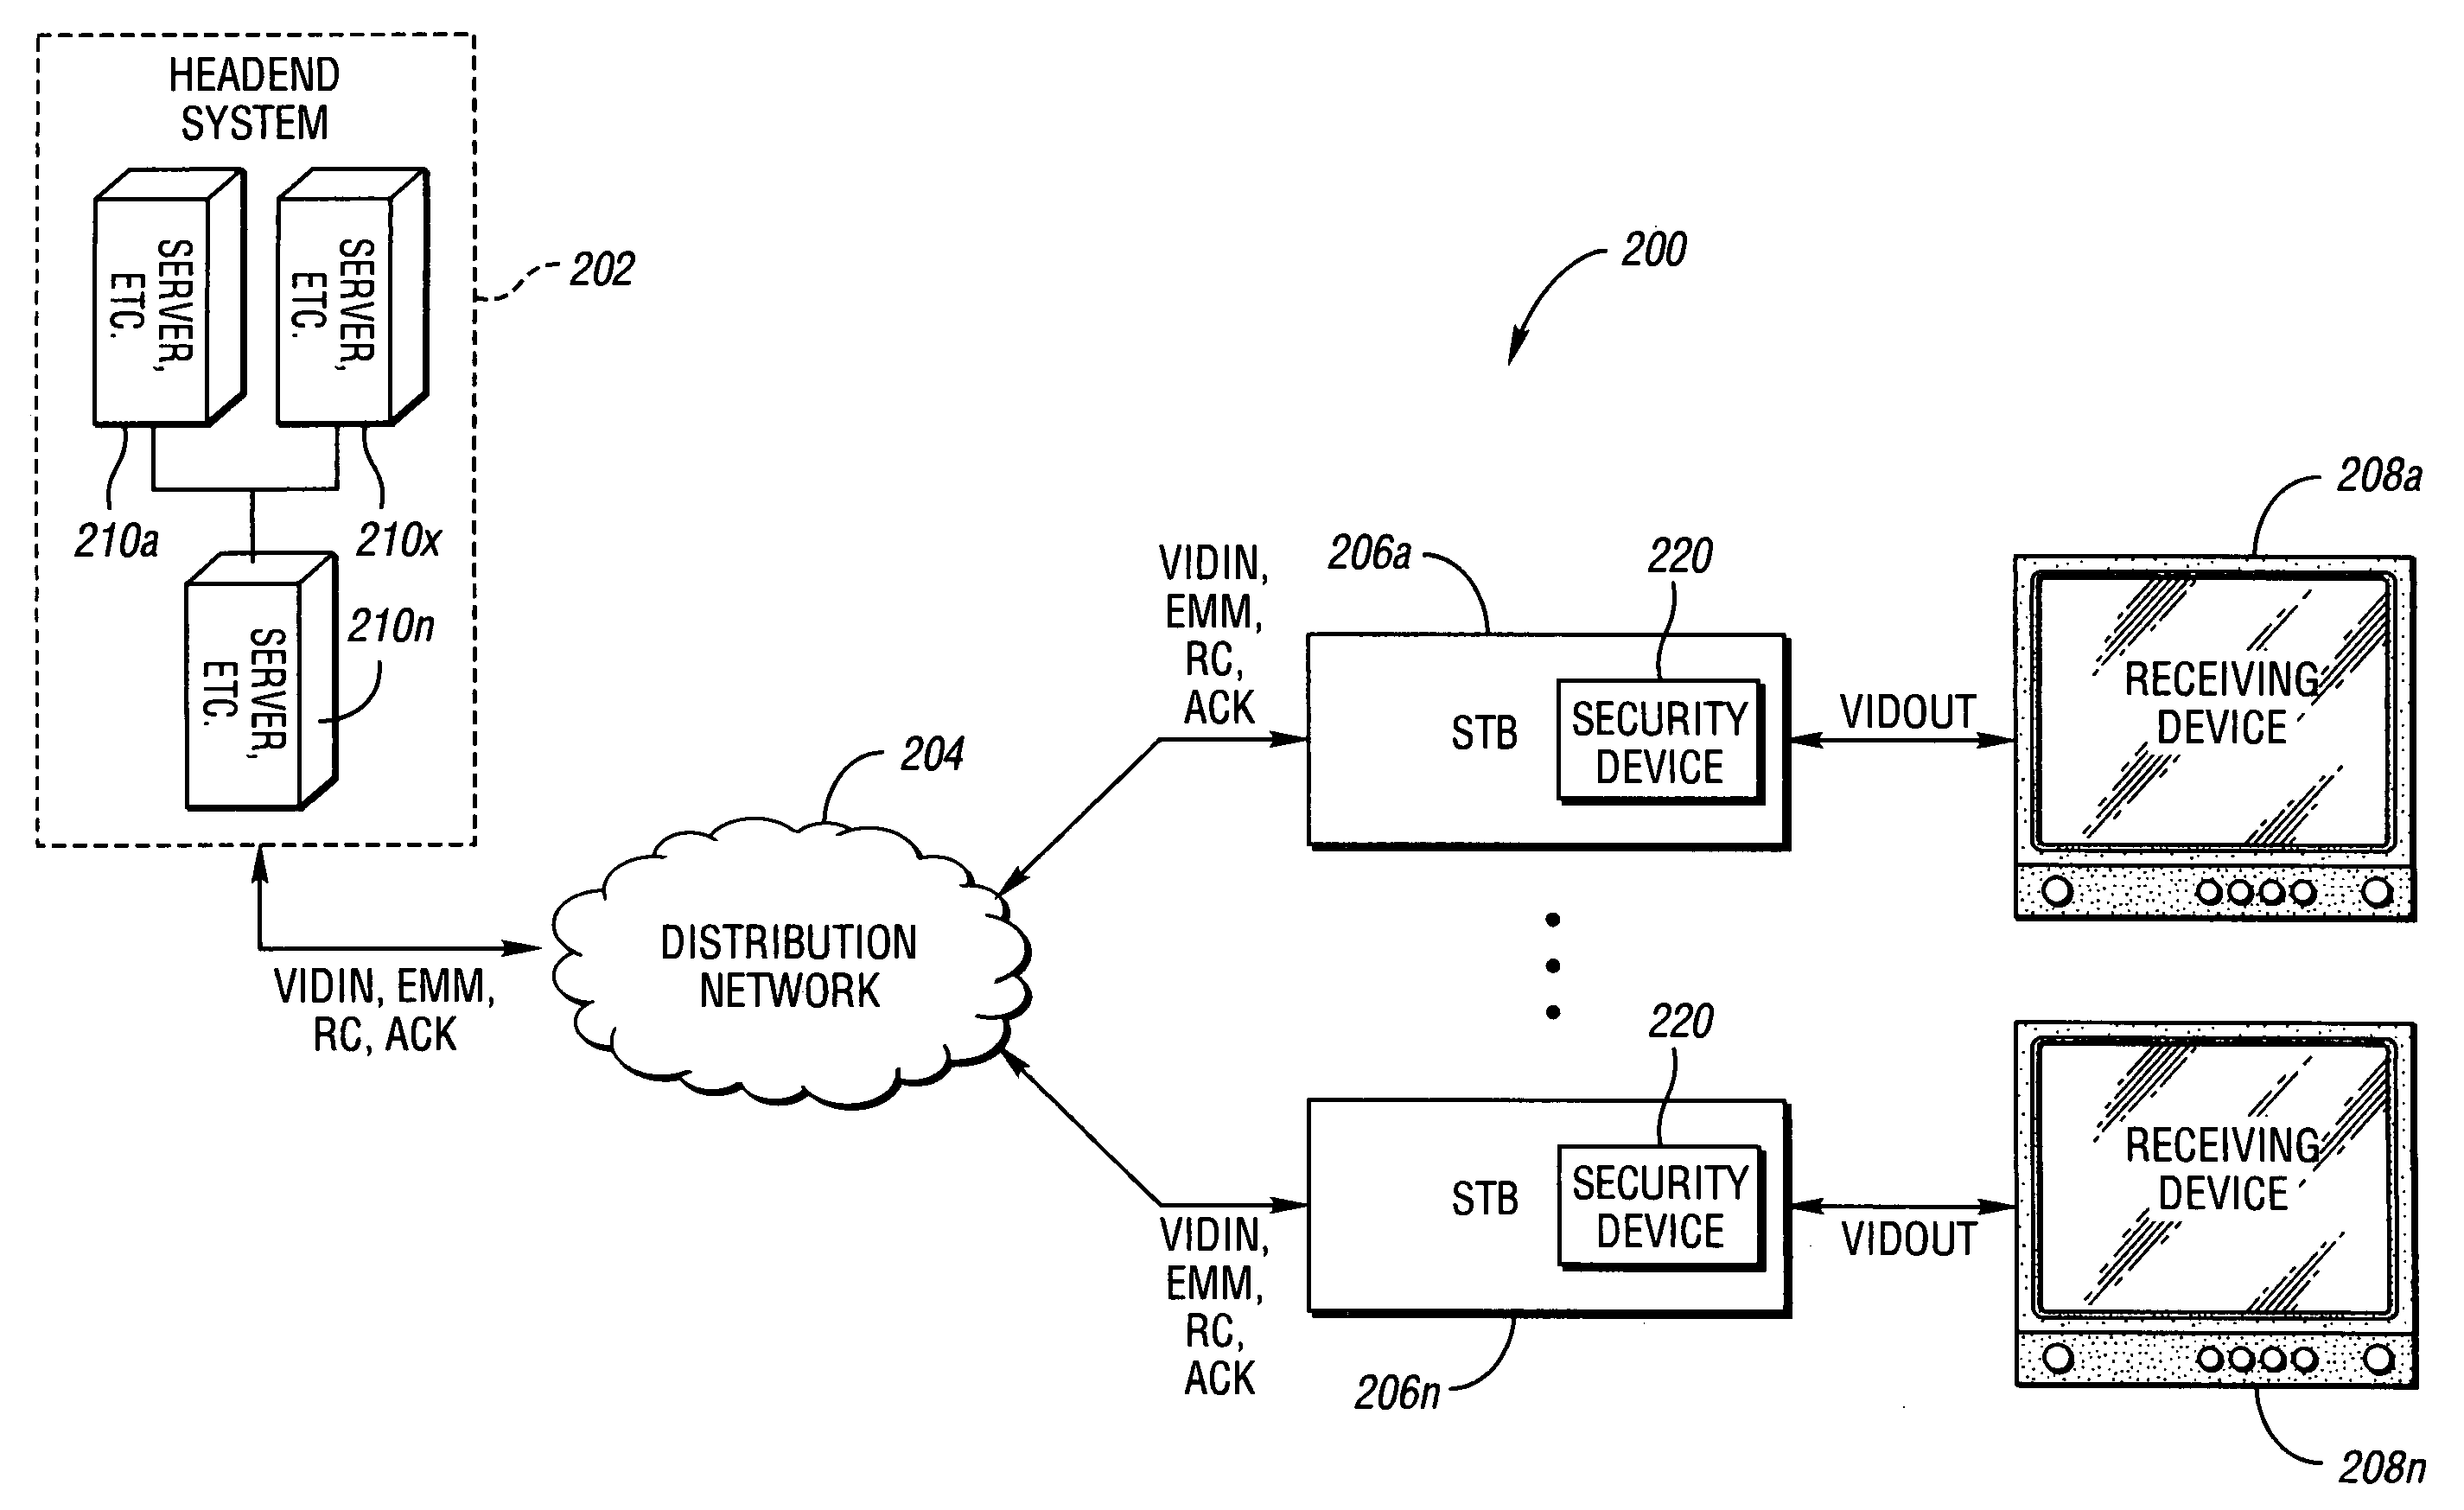 System and method for secure conditional access download and reconfiguration